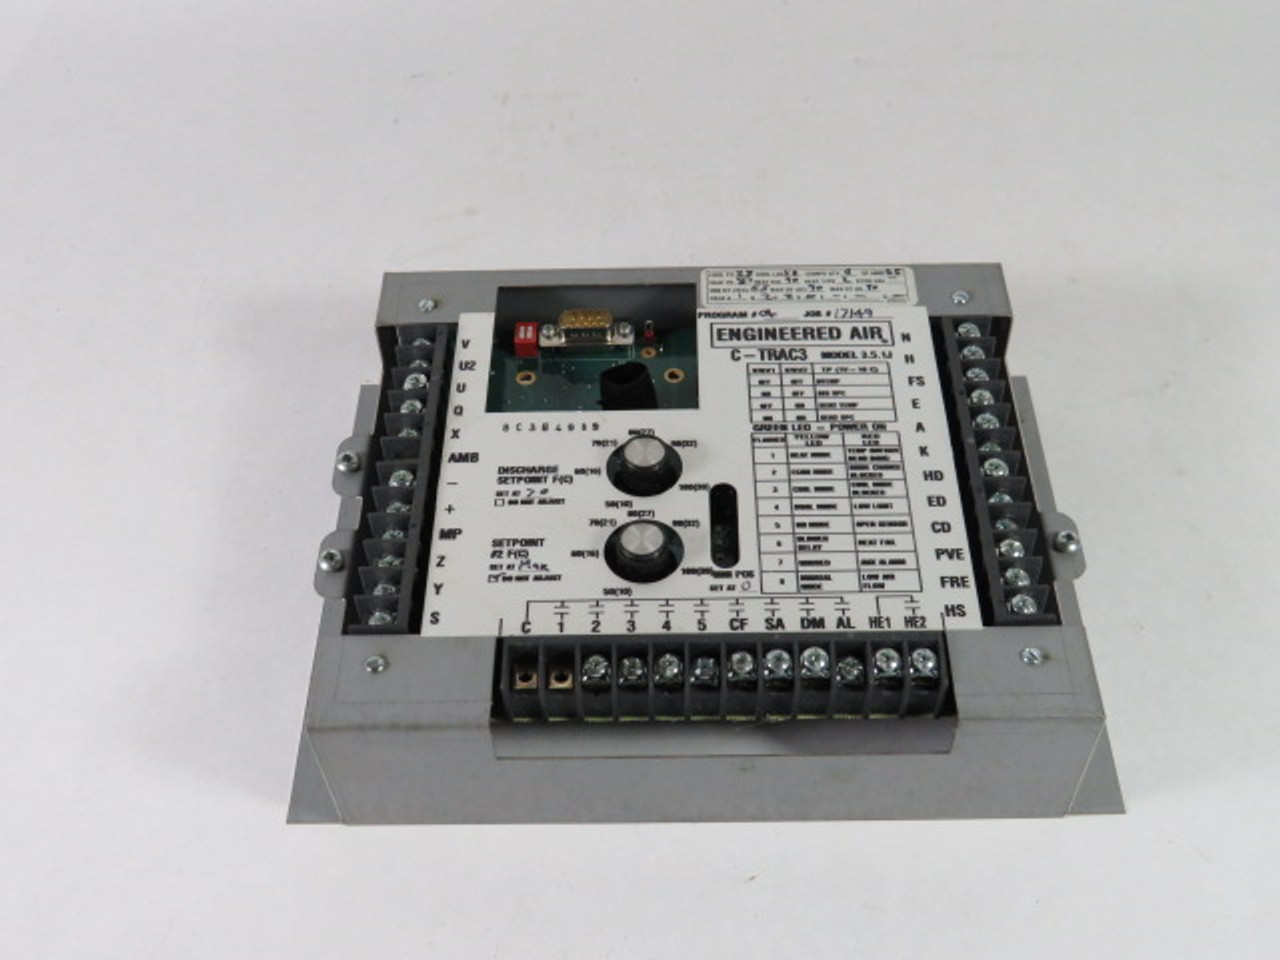 Engineered Air C-TRAC3-3.5.1J Cooling Control Module USED